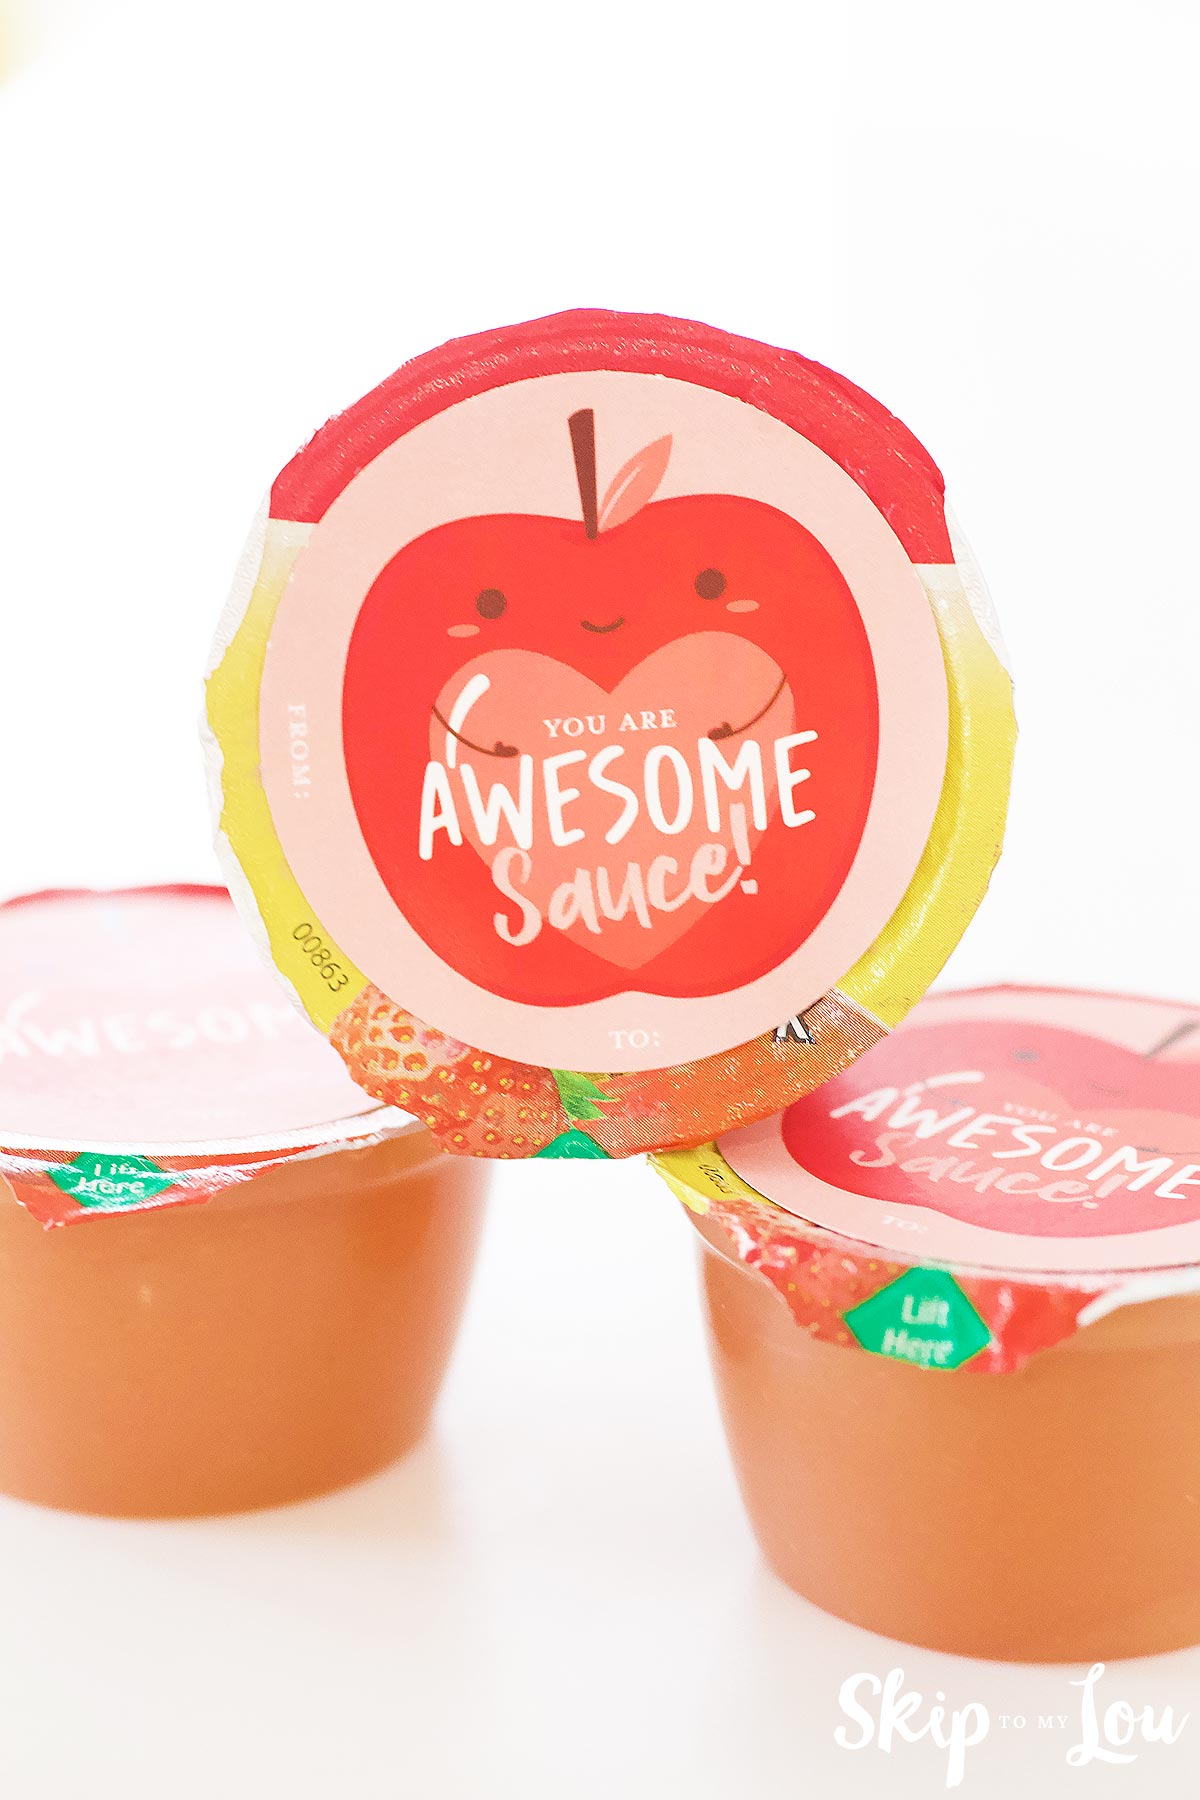 indiviual applesauce cups with cut tags that says your awesomesauce